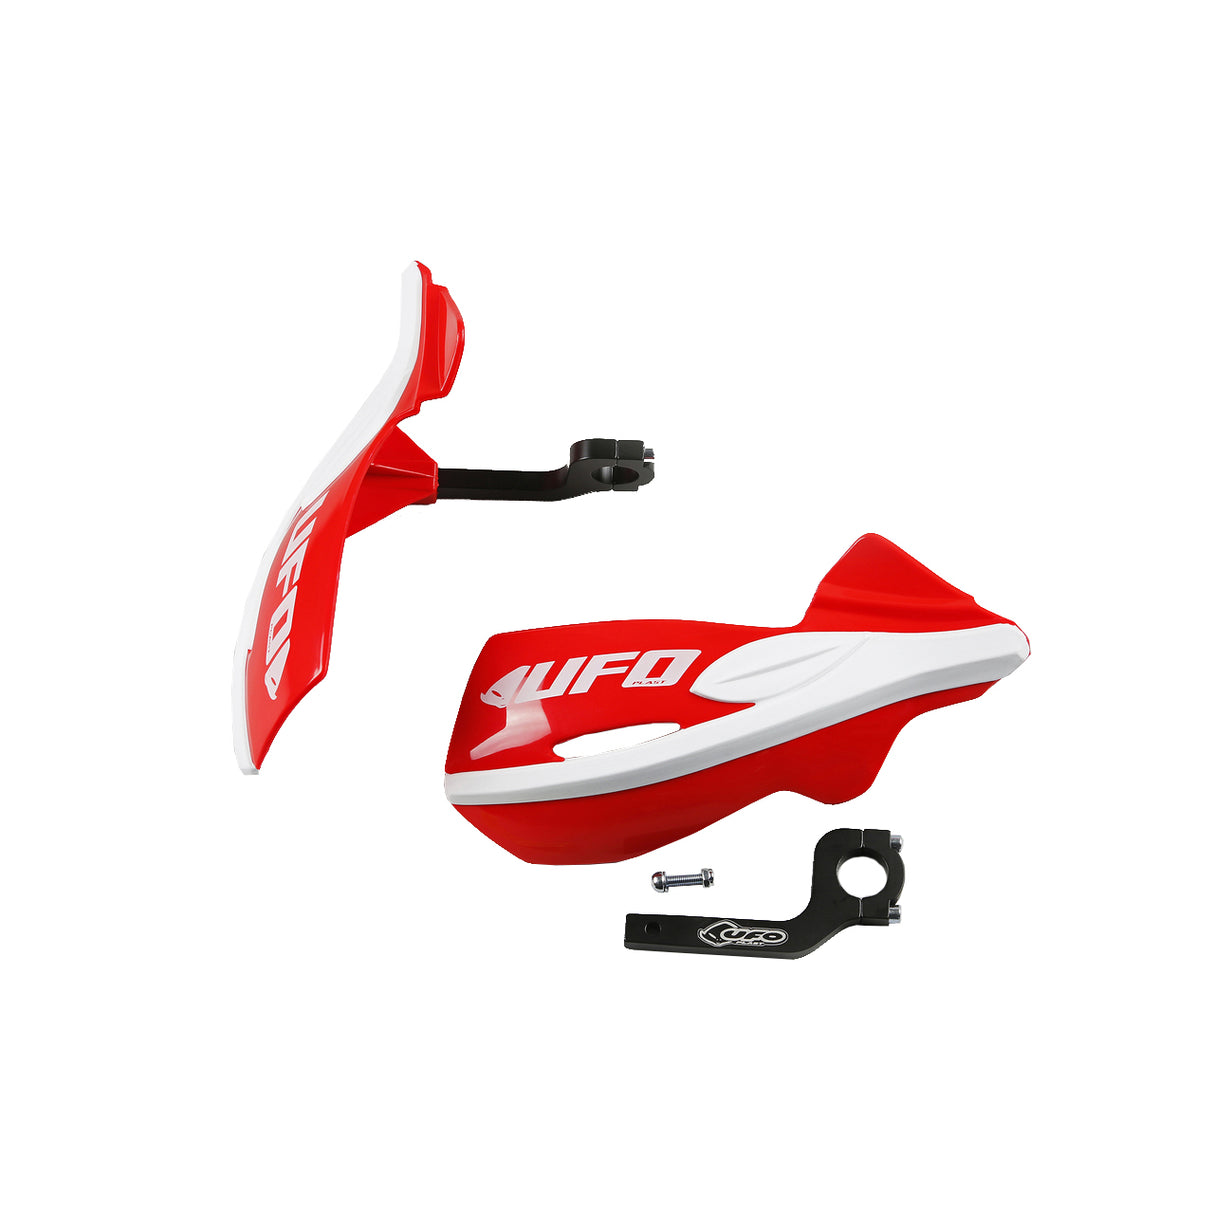 UFO Patrol Handguards (Red/White) Mounting Kit Included